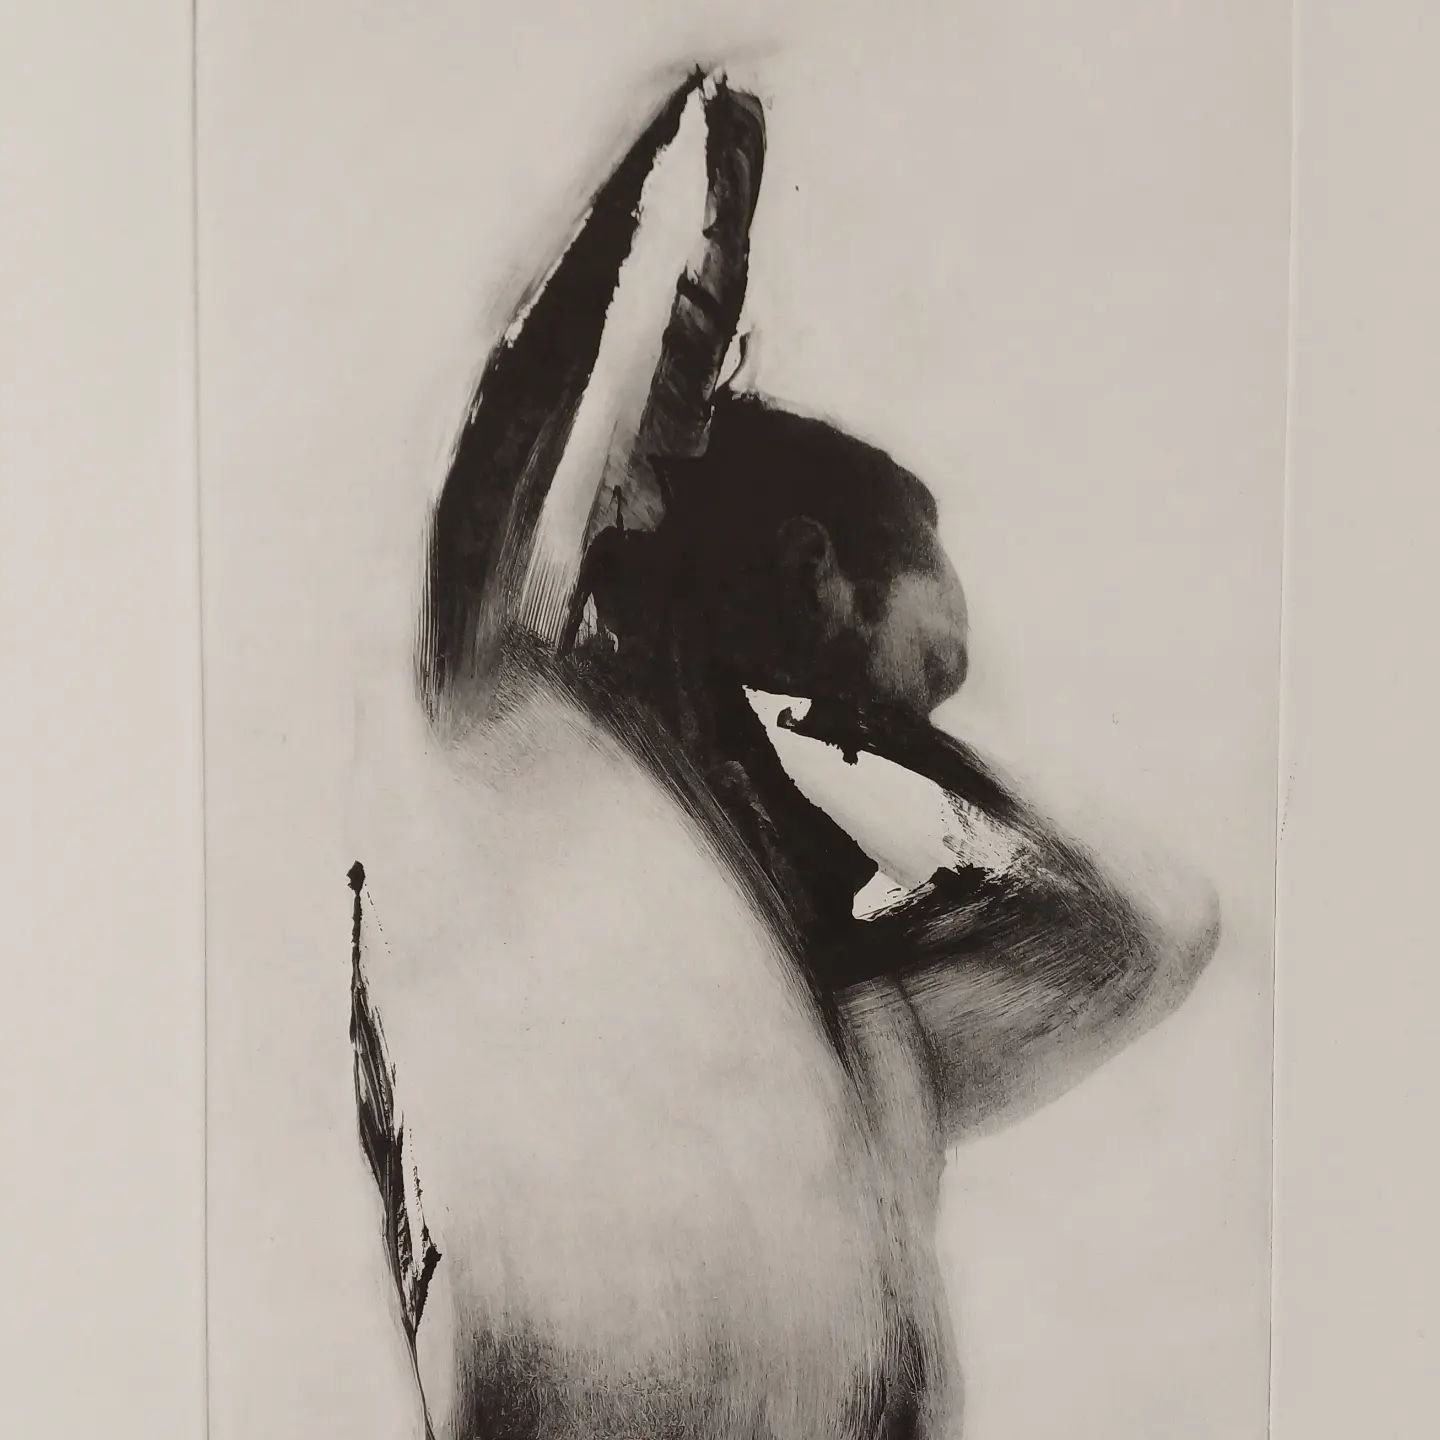 'When Love Was King, in Light &amp; Shadow'

From a new series of monotype etchings, looking at the manipulation of the human form and moments of abstraction.

#monoprint #lifemodel #drawnfromlife #polymergravure #etching #artistsprints #malemodel #f